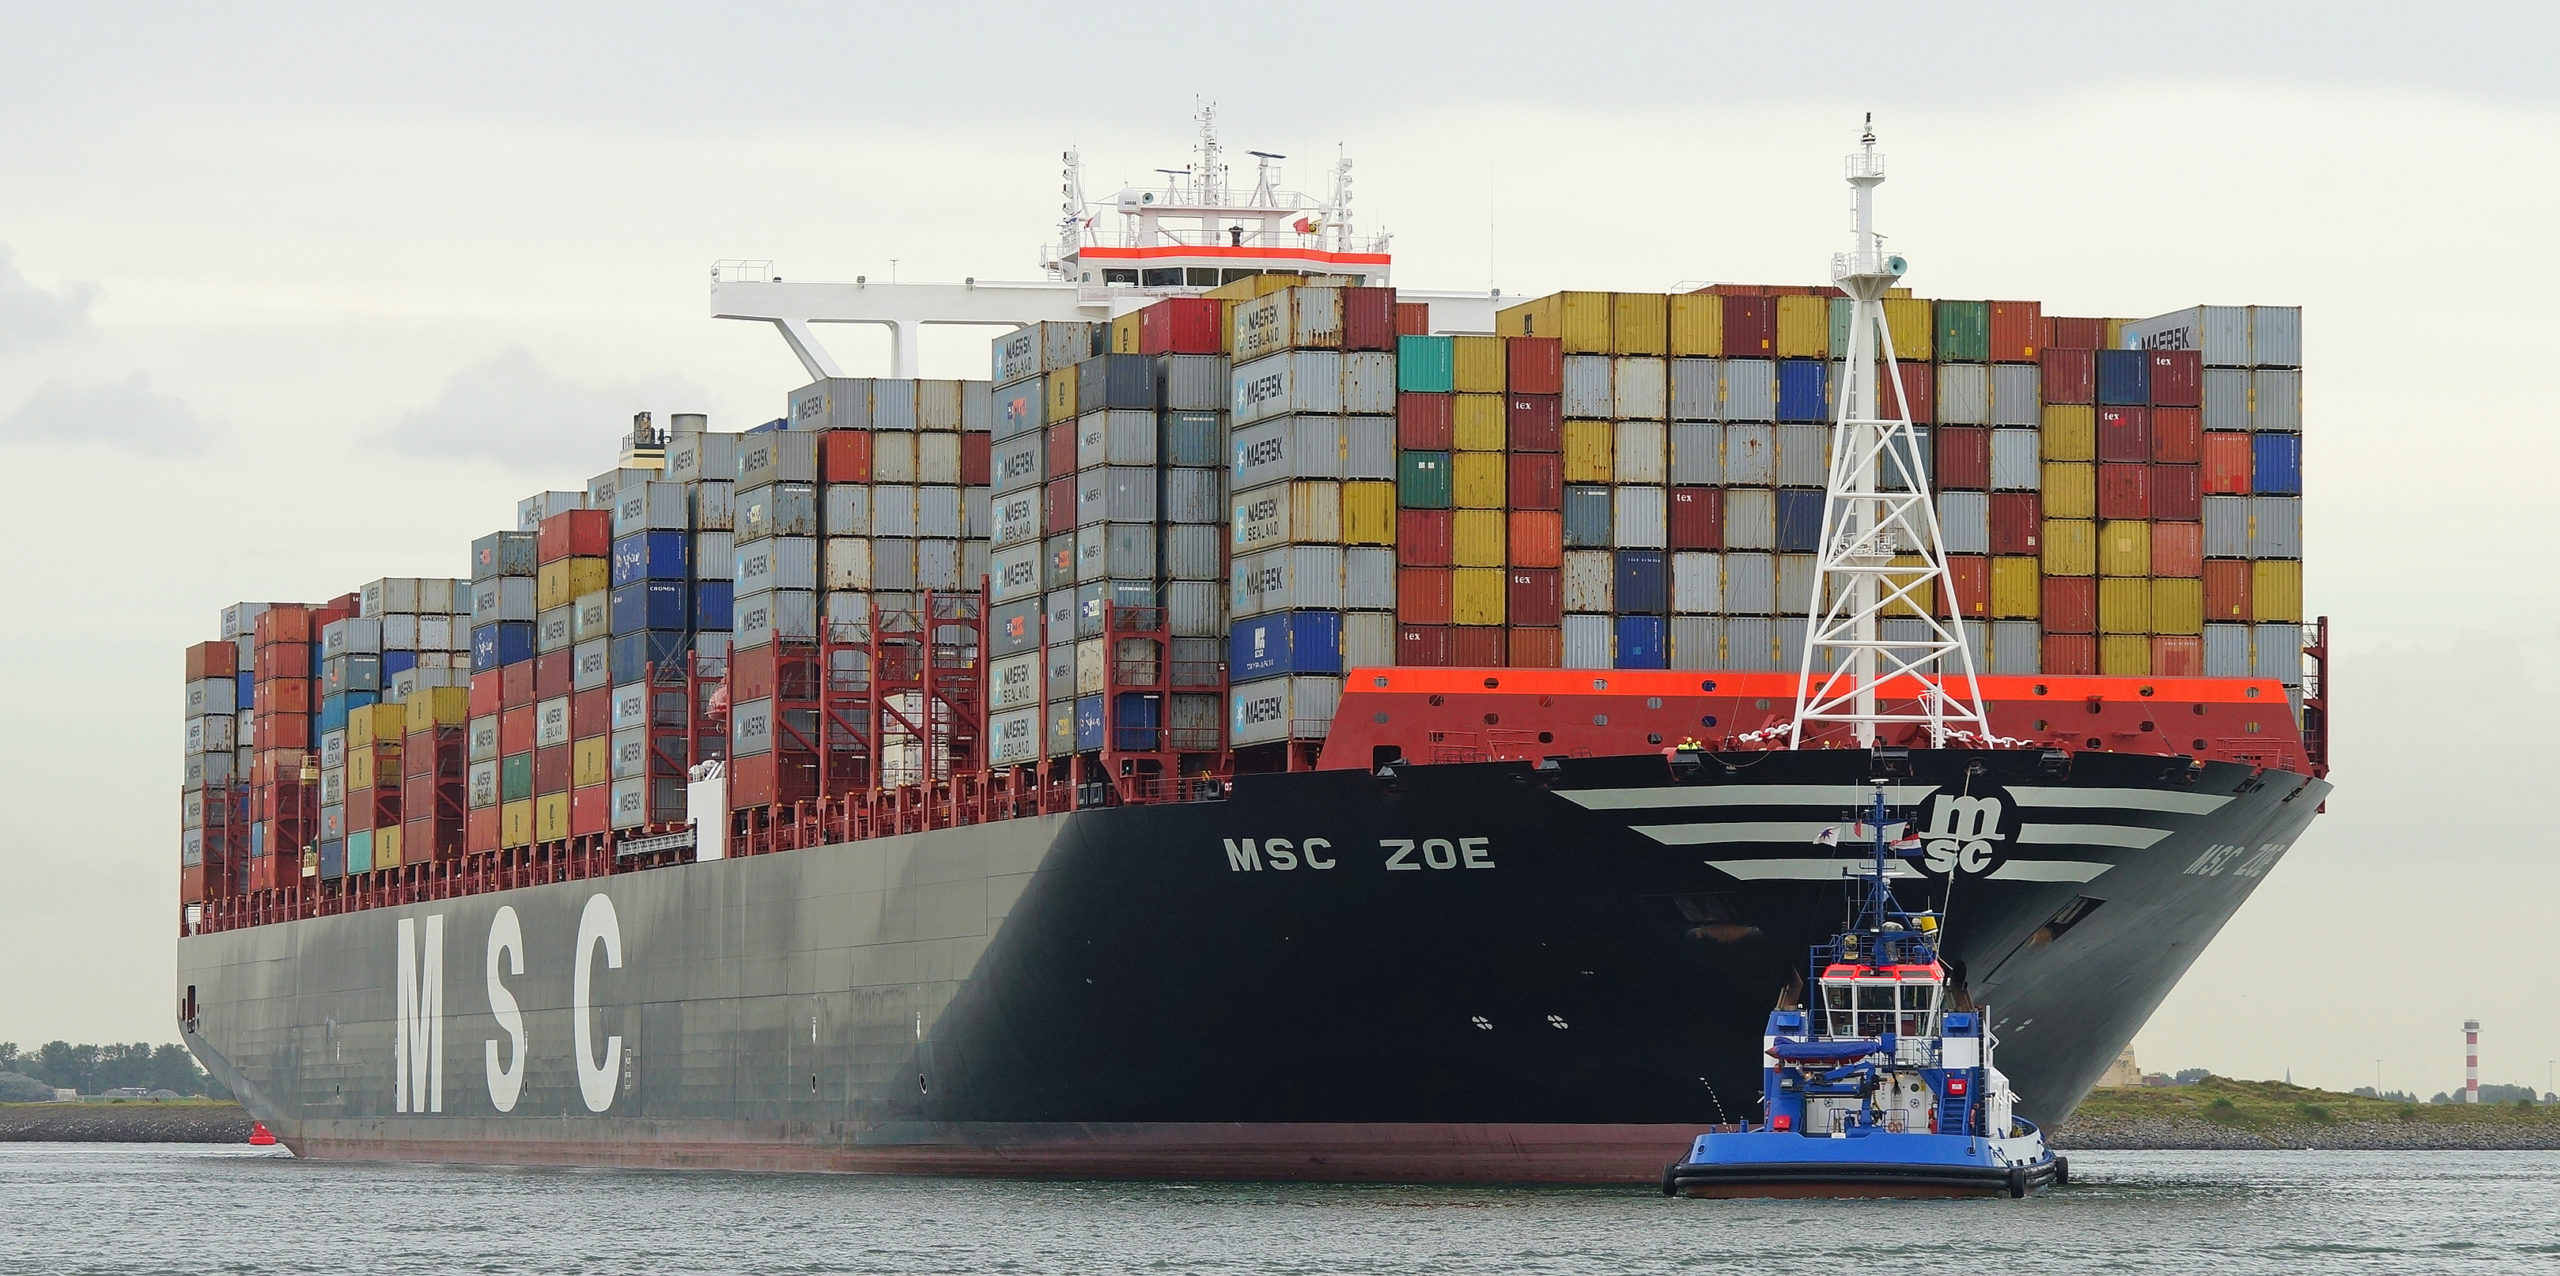 A leader in the international maritime freight market, MSC announced the indefinite suspension of its container stuffing and inland transport operations in Brazil.